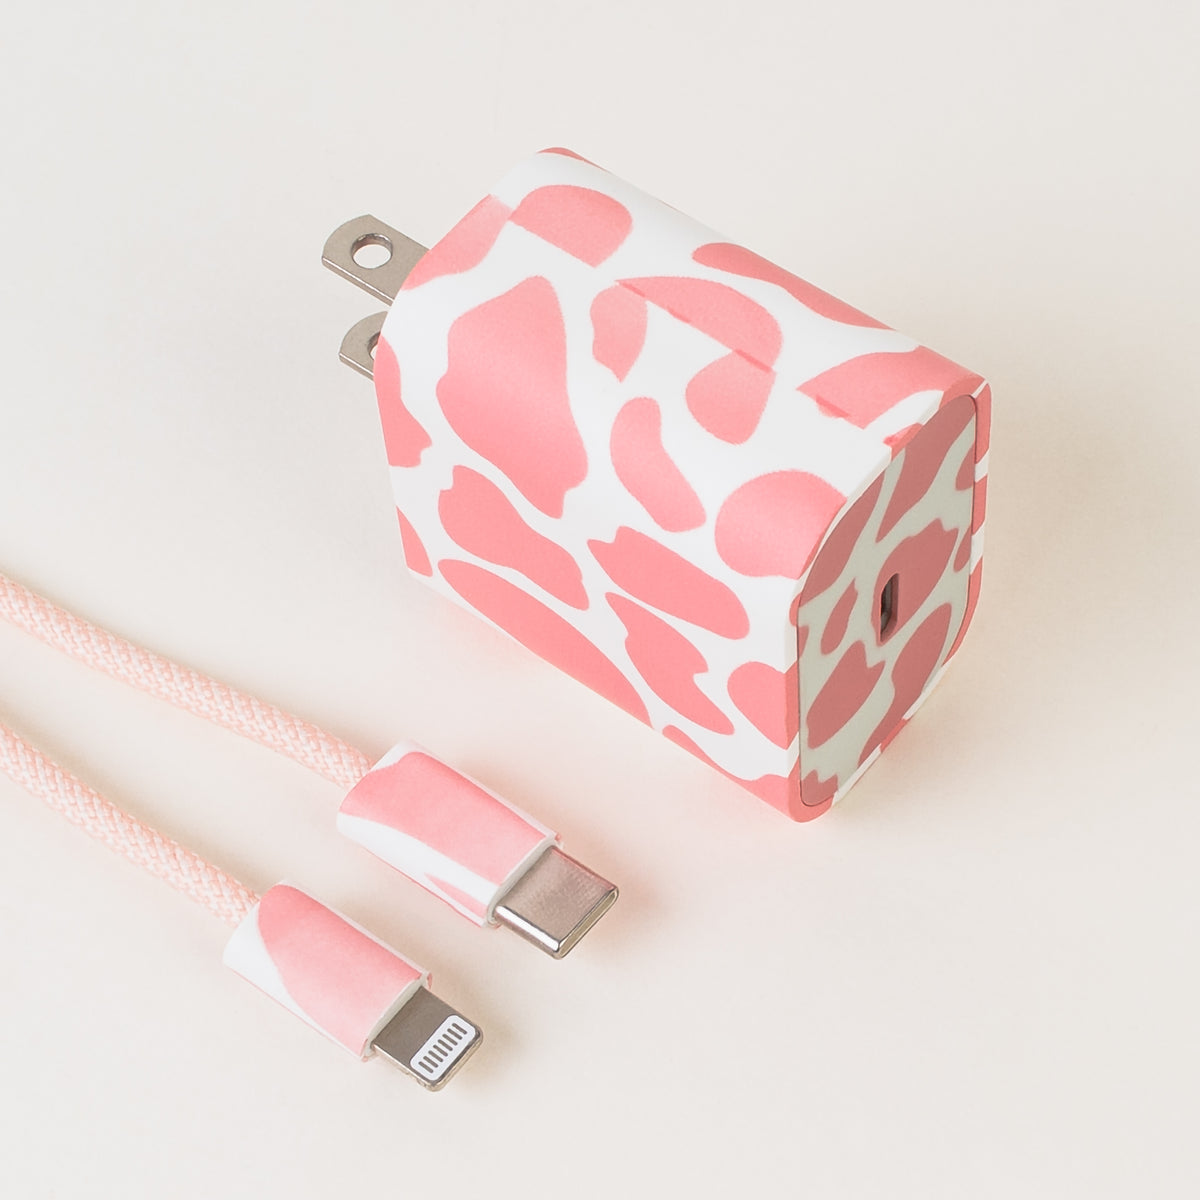 USBC-PC - Lightning to USB-C Port Phone Charger - Pink Cow